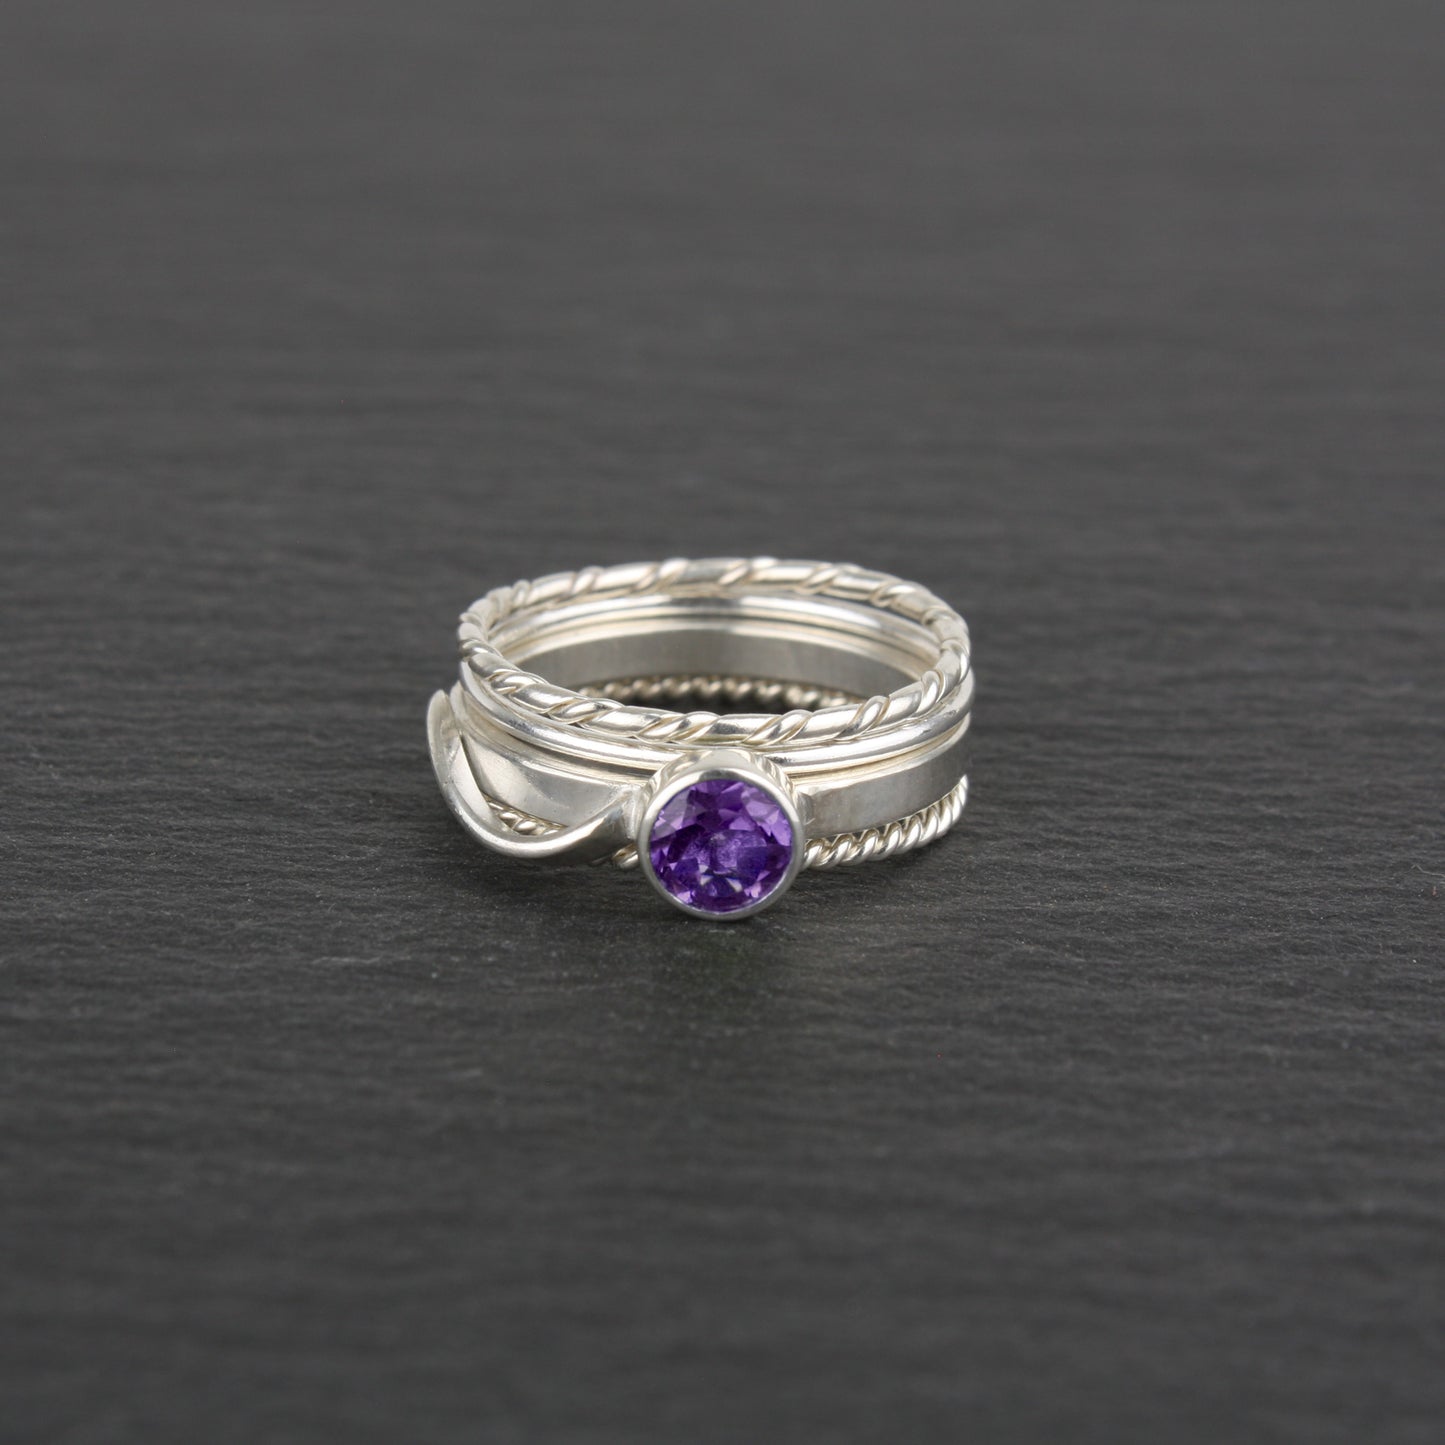 Stacking Rings with Amethyst - Set of 4